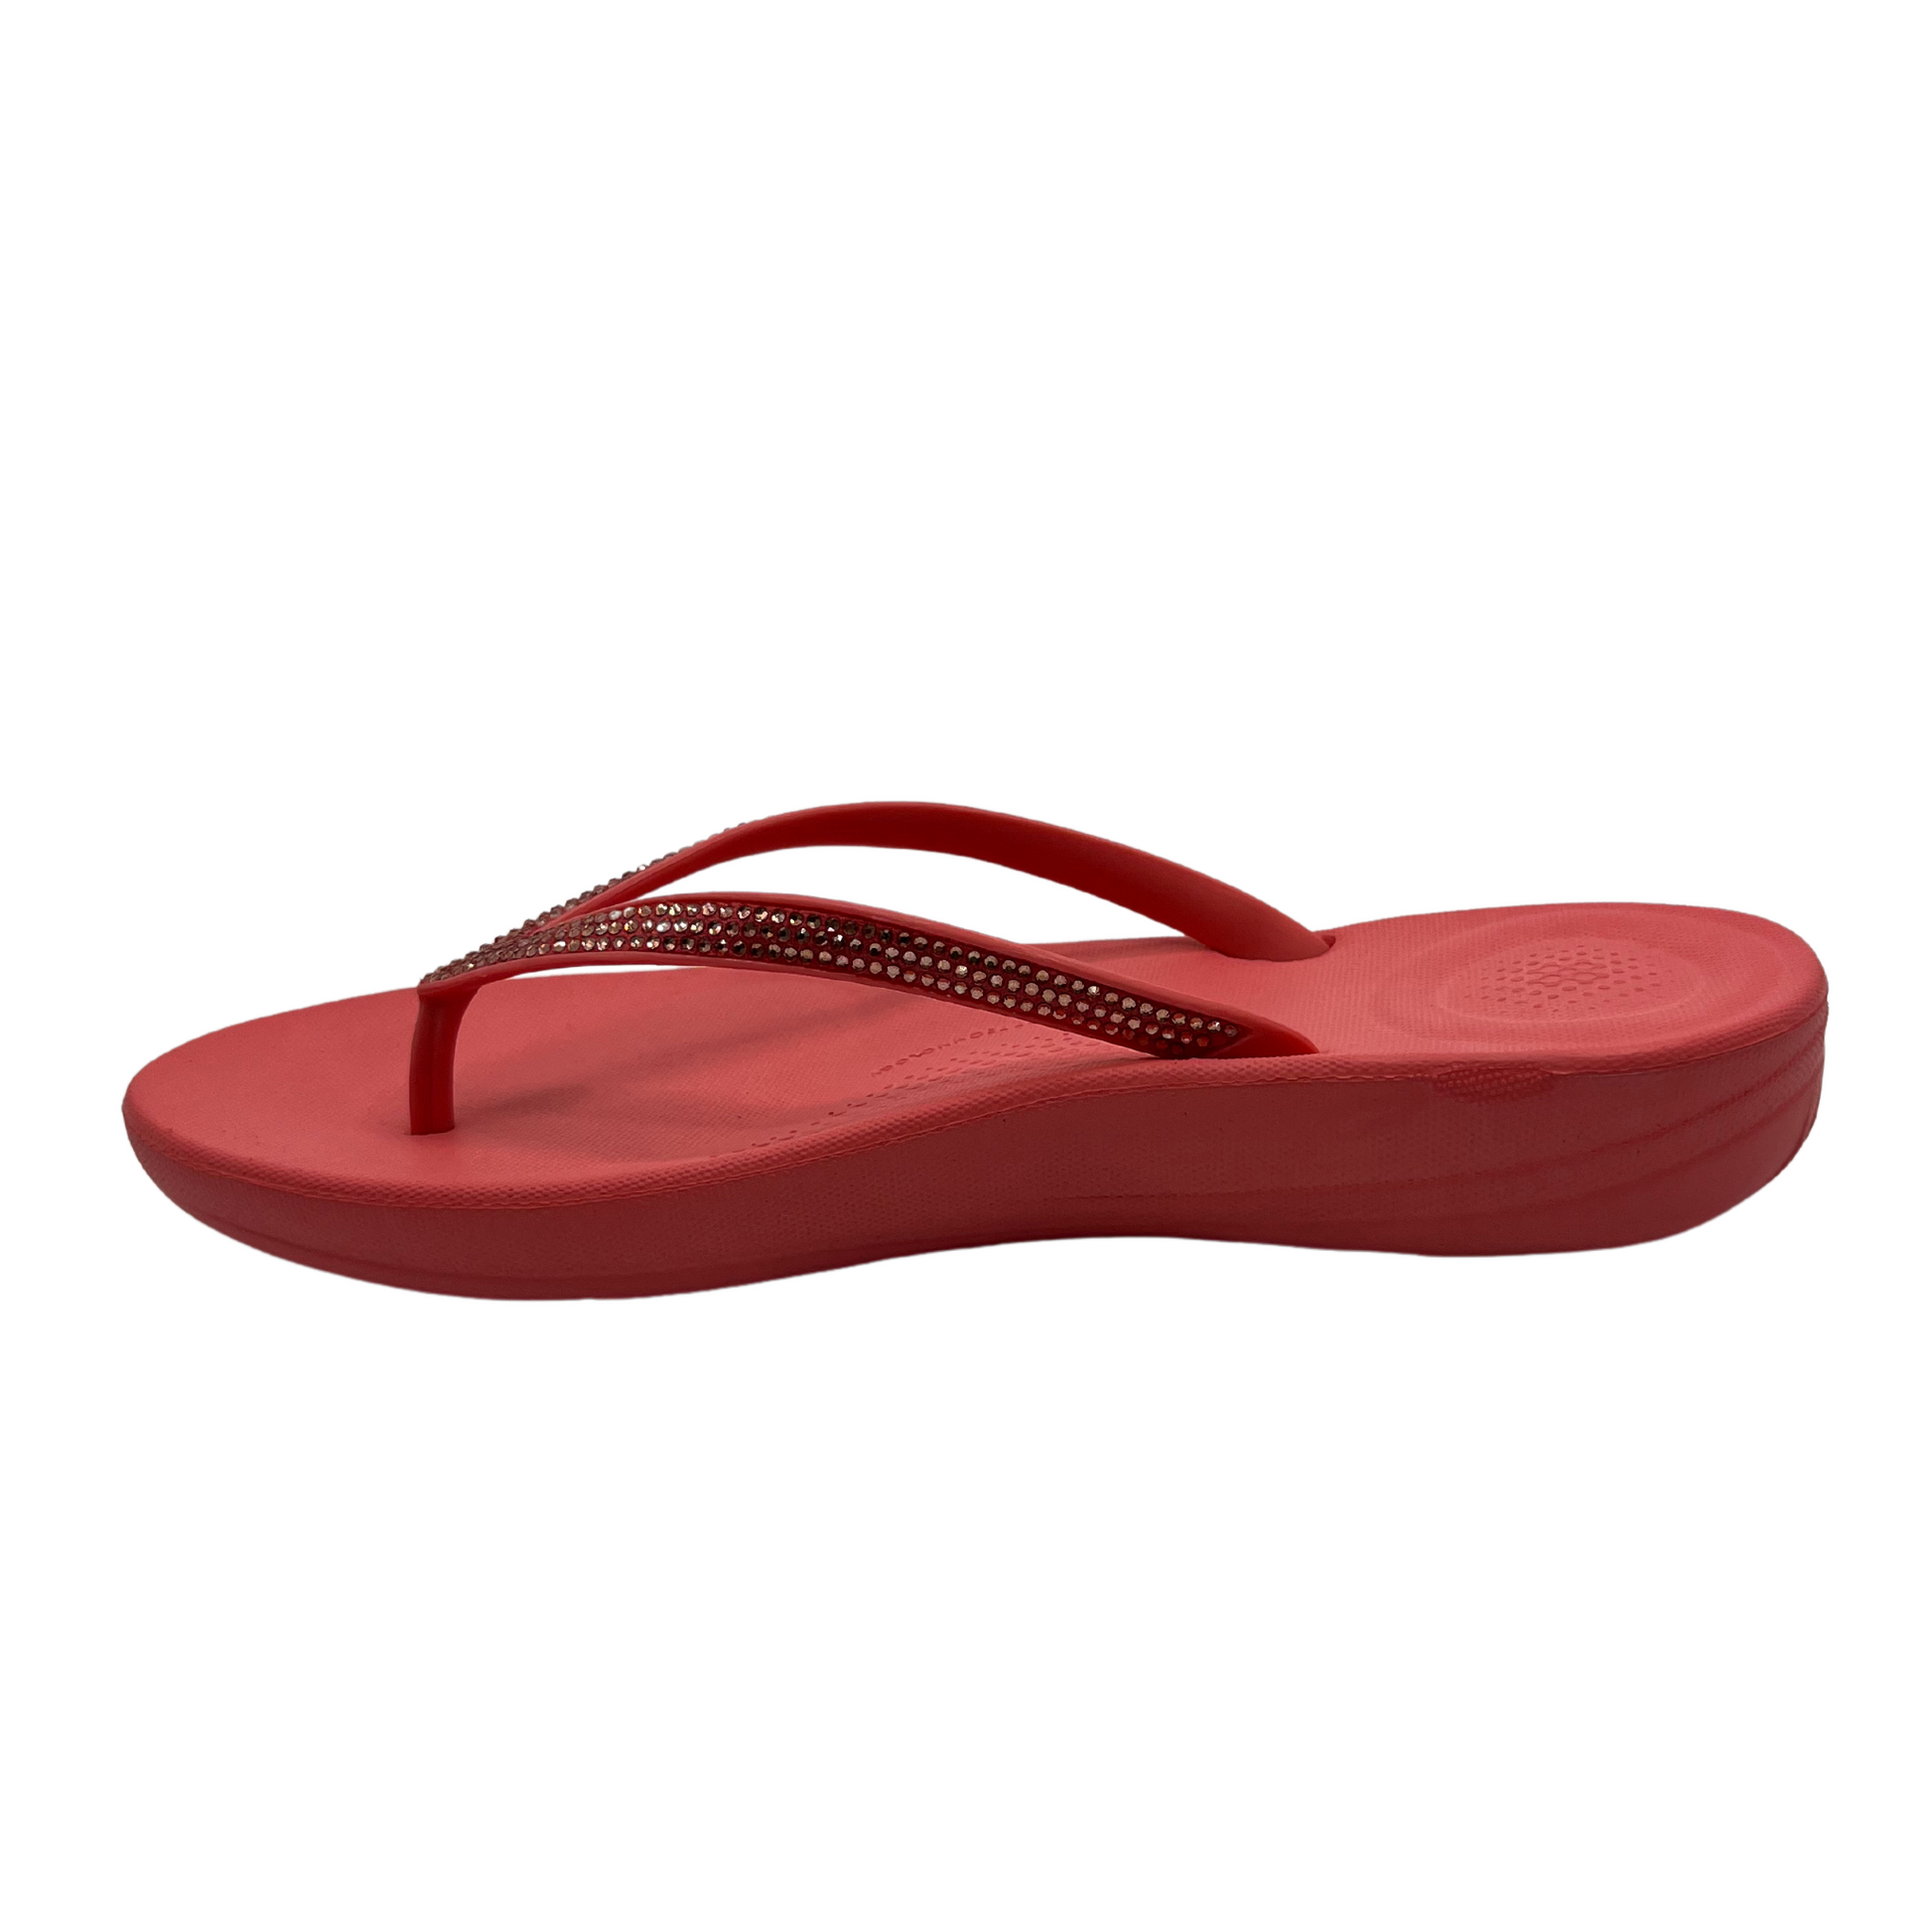 Left facing view of rosy coral flip flop with bejewelled thong strap